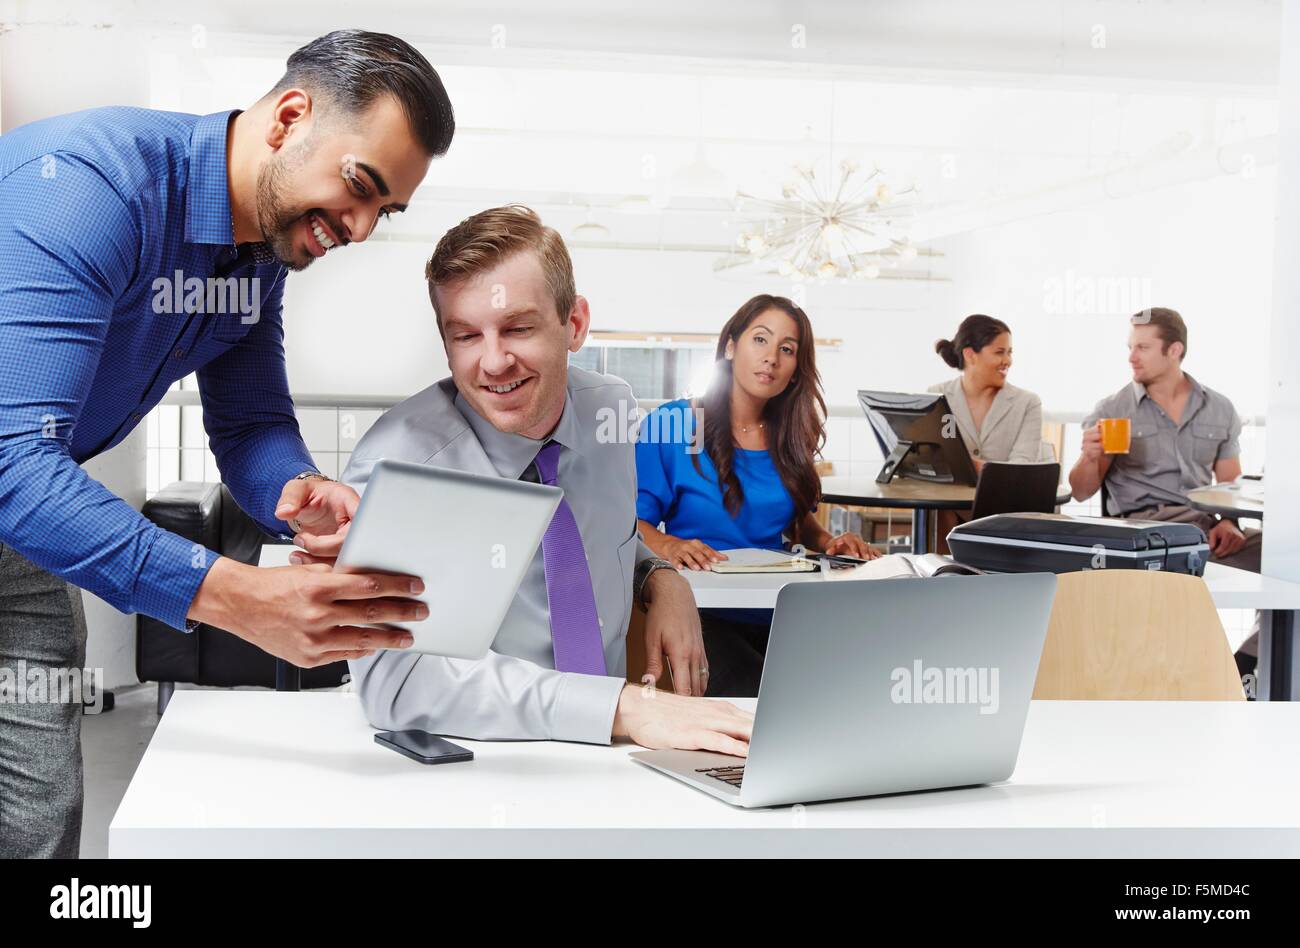 Two businessmen having discussion, looking at digital tablet, colleagues working in background Stock Photo